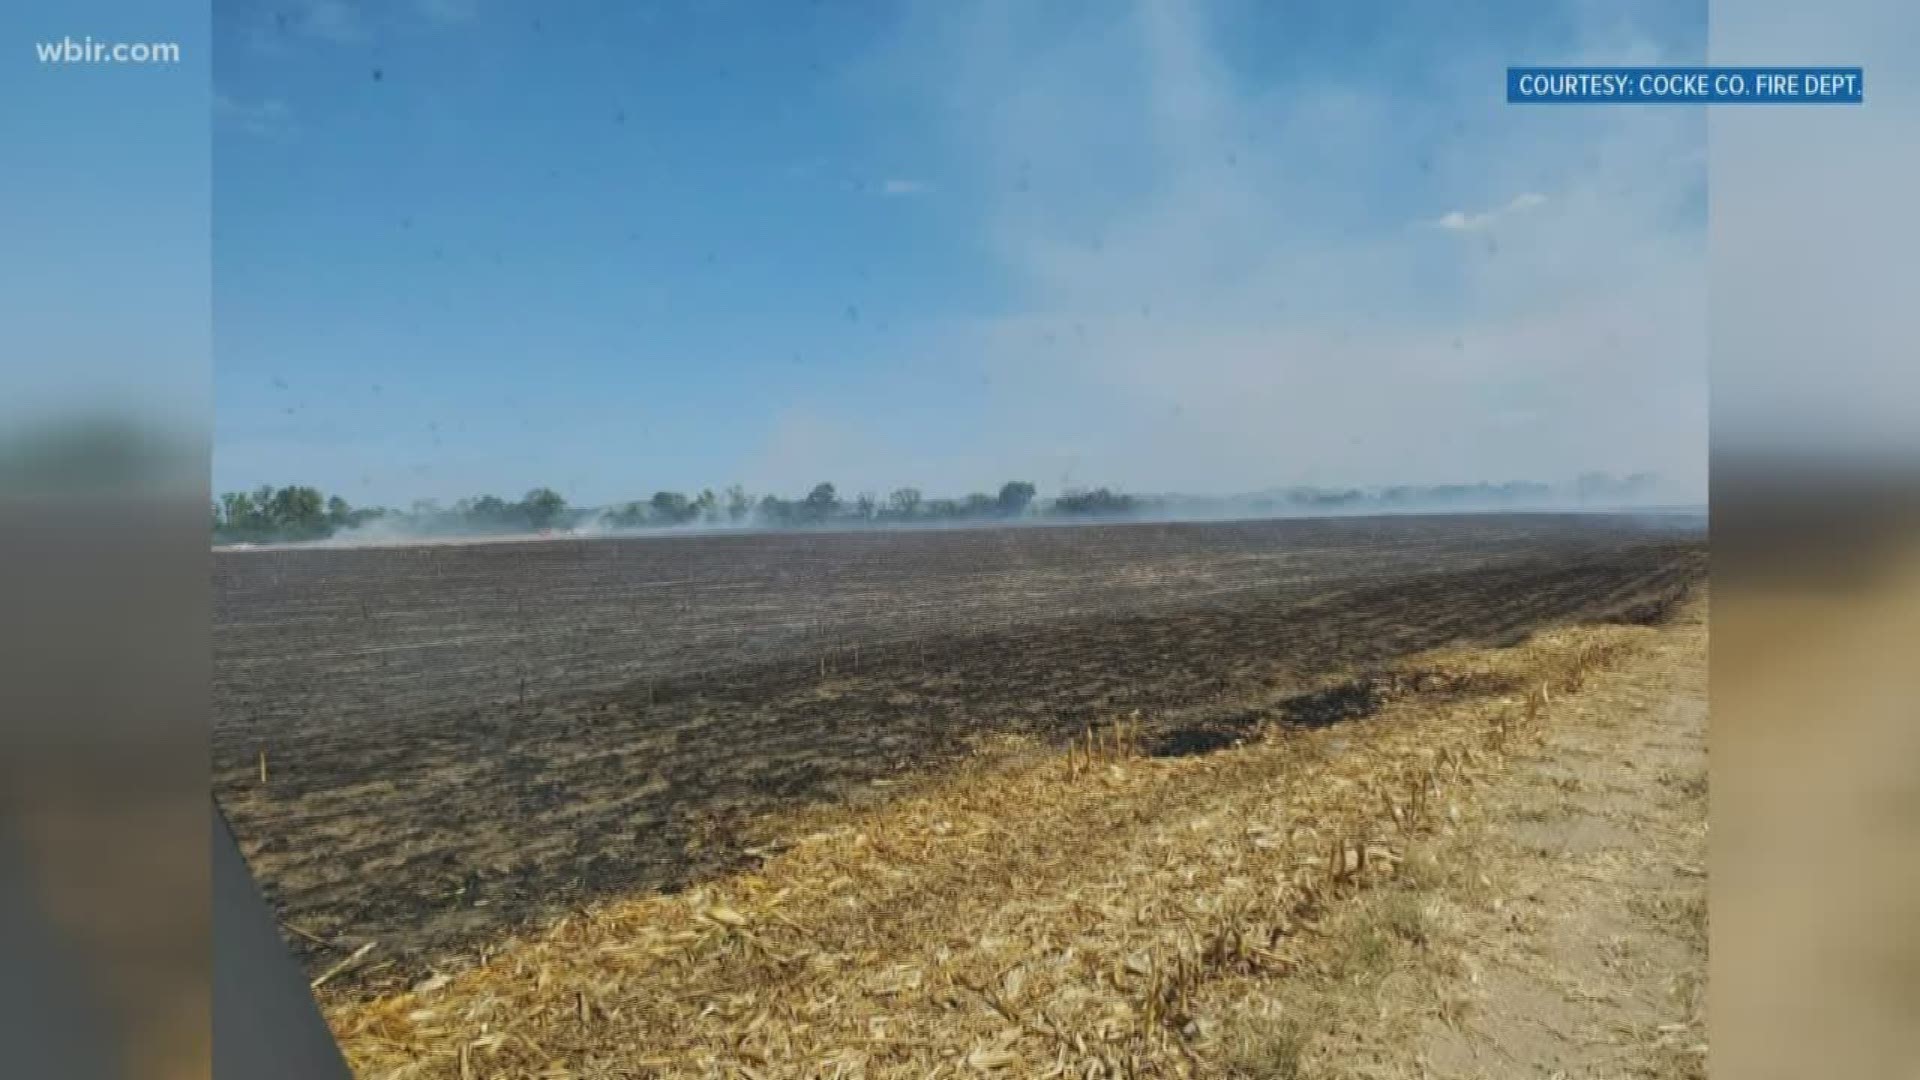 Fire officials haven't said what caused the fire yet but said the field had just been cut and most of the crops had been harvested.